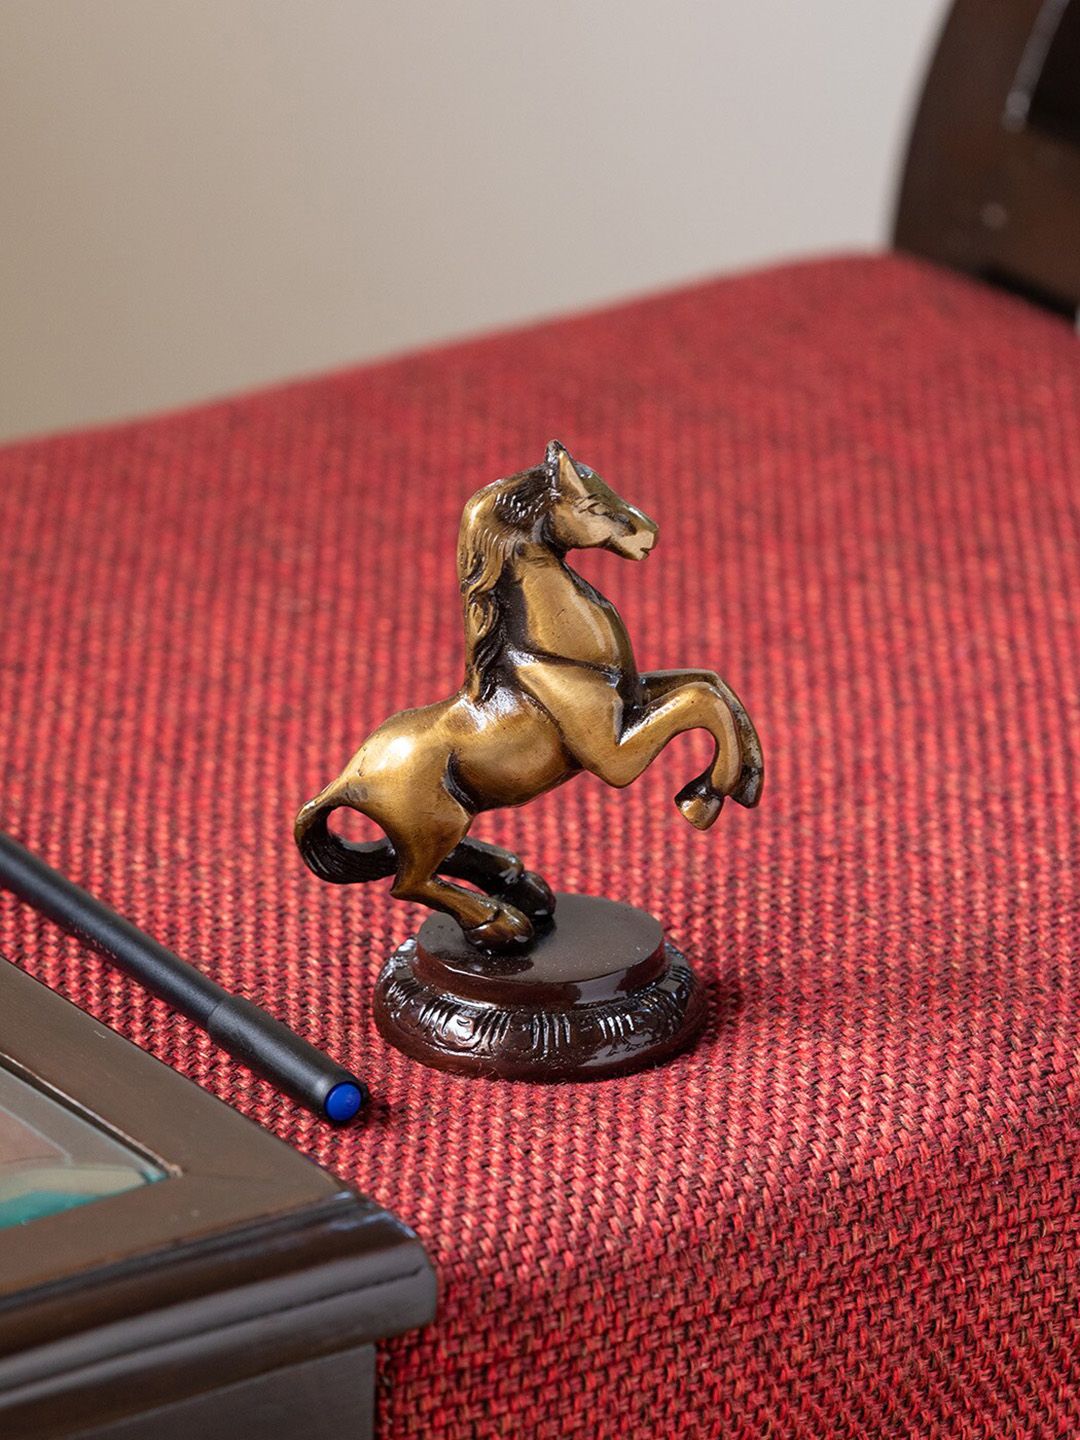 ExclusiveLane Gold-Toned 
& Brown The Headstrong Horse Hand-Etched Figurine Showpiece Price in India